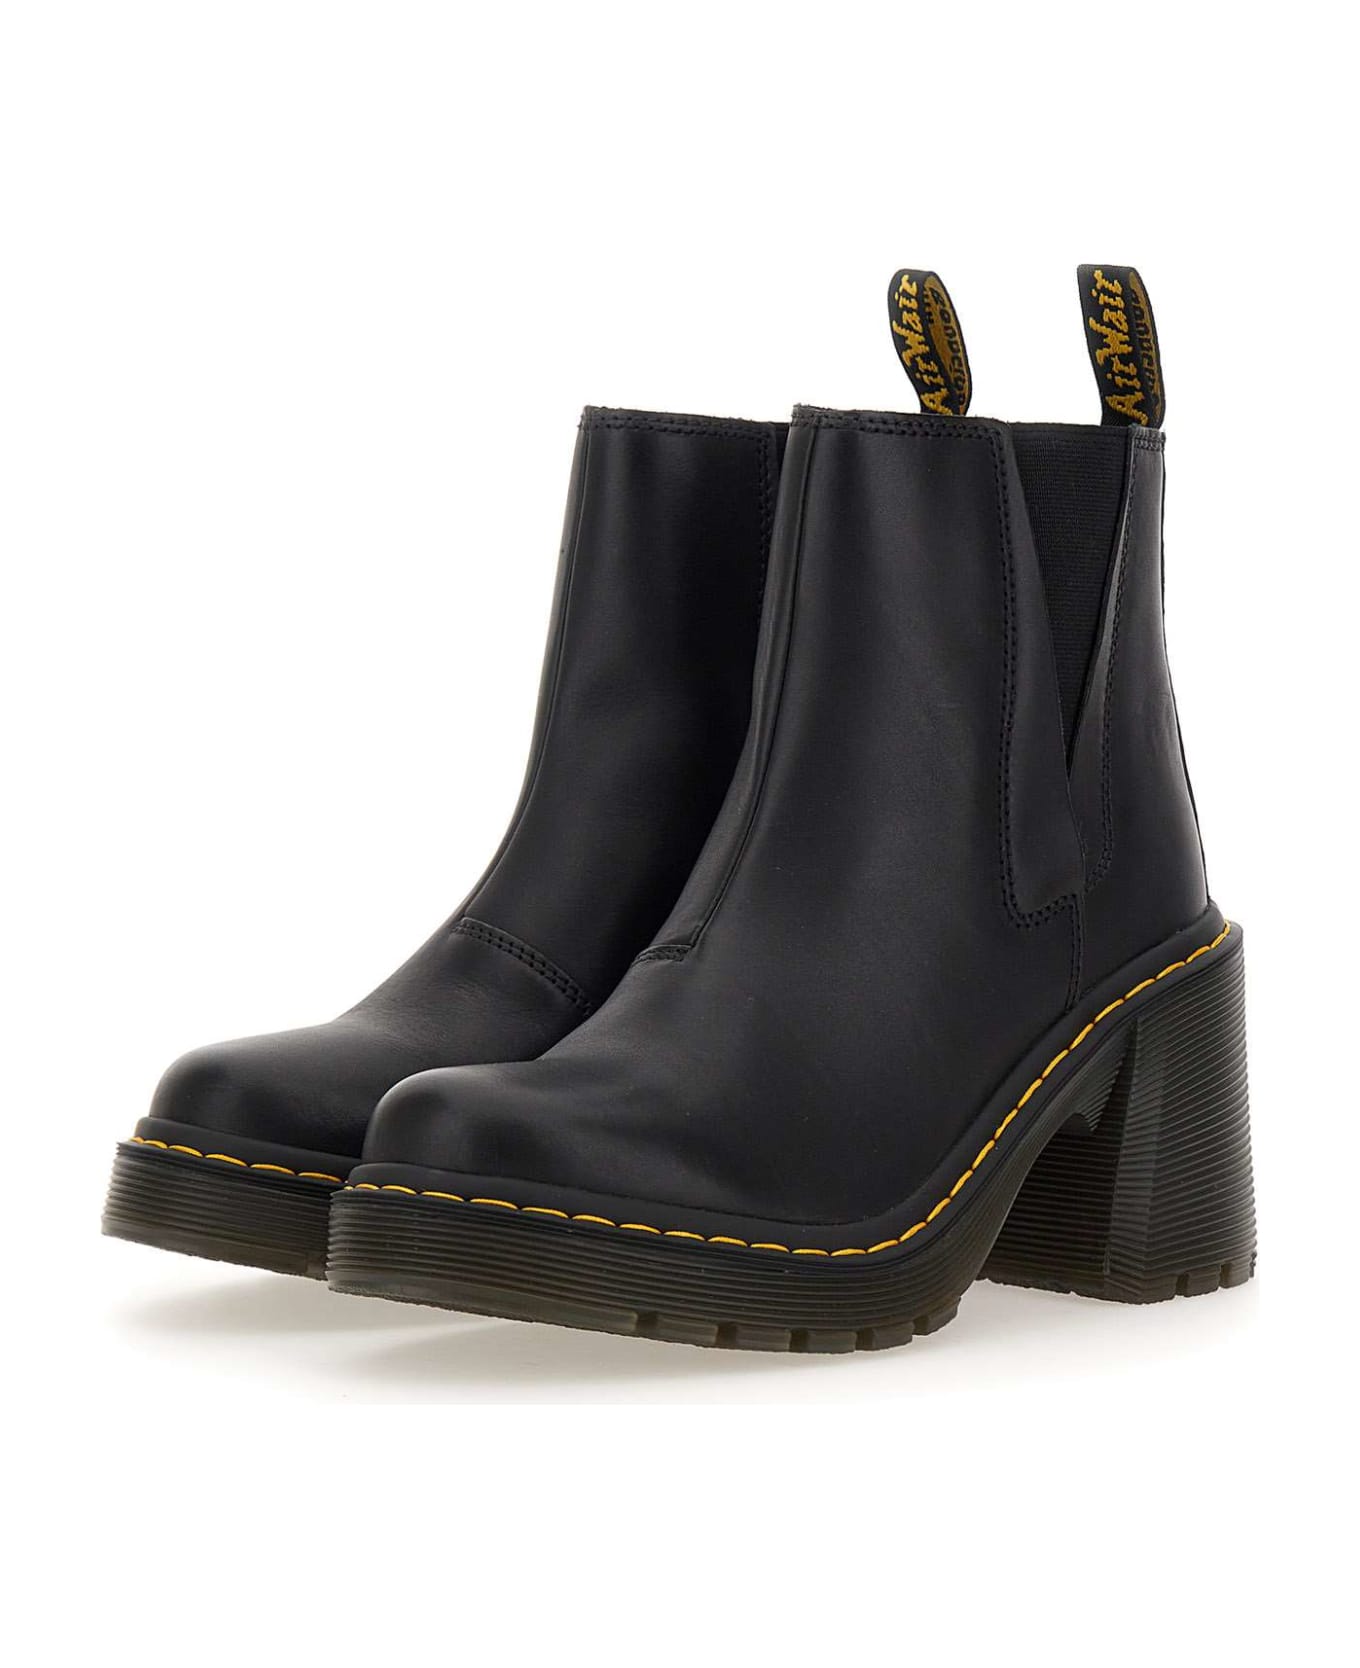 Dr. Martens Spence Leather Ankle Boots - BLACK